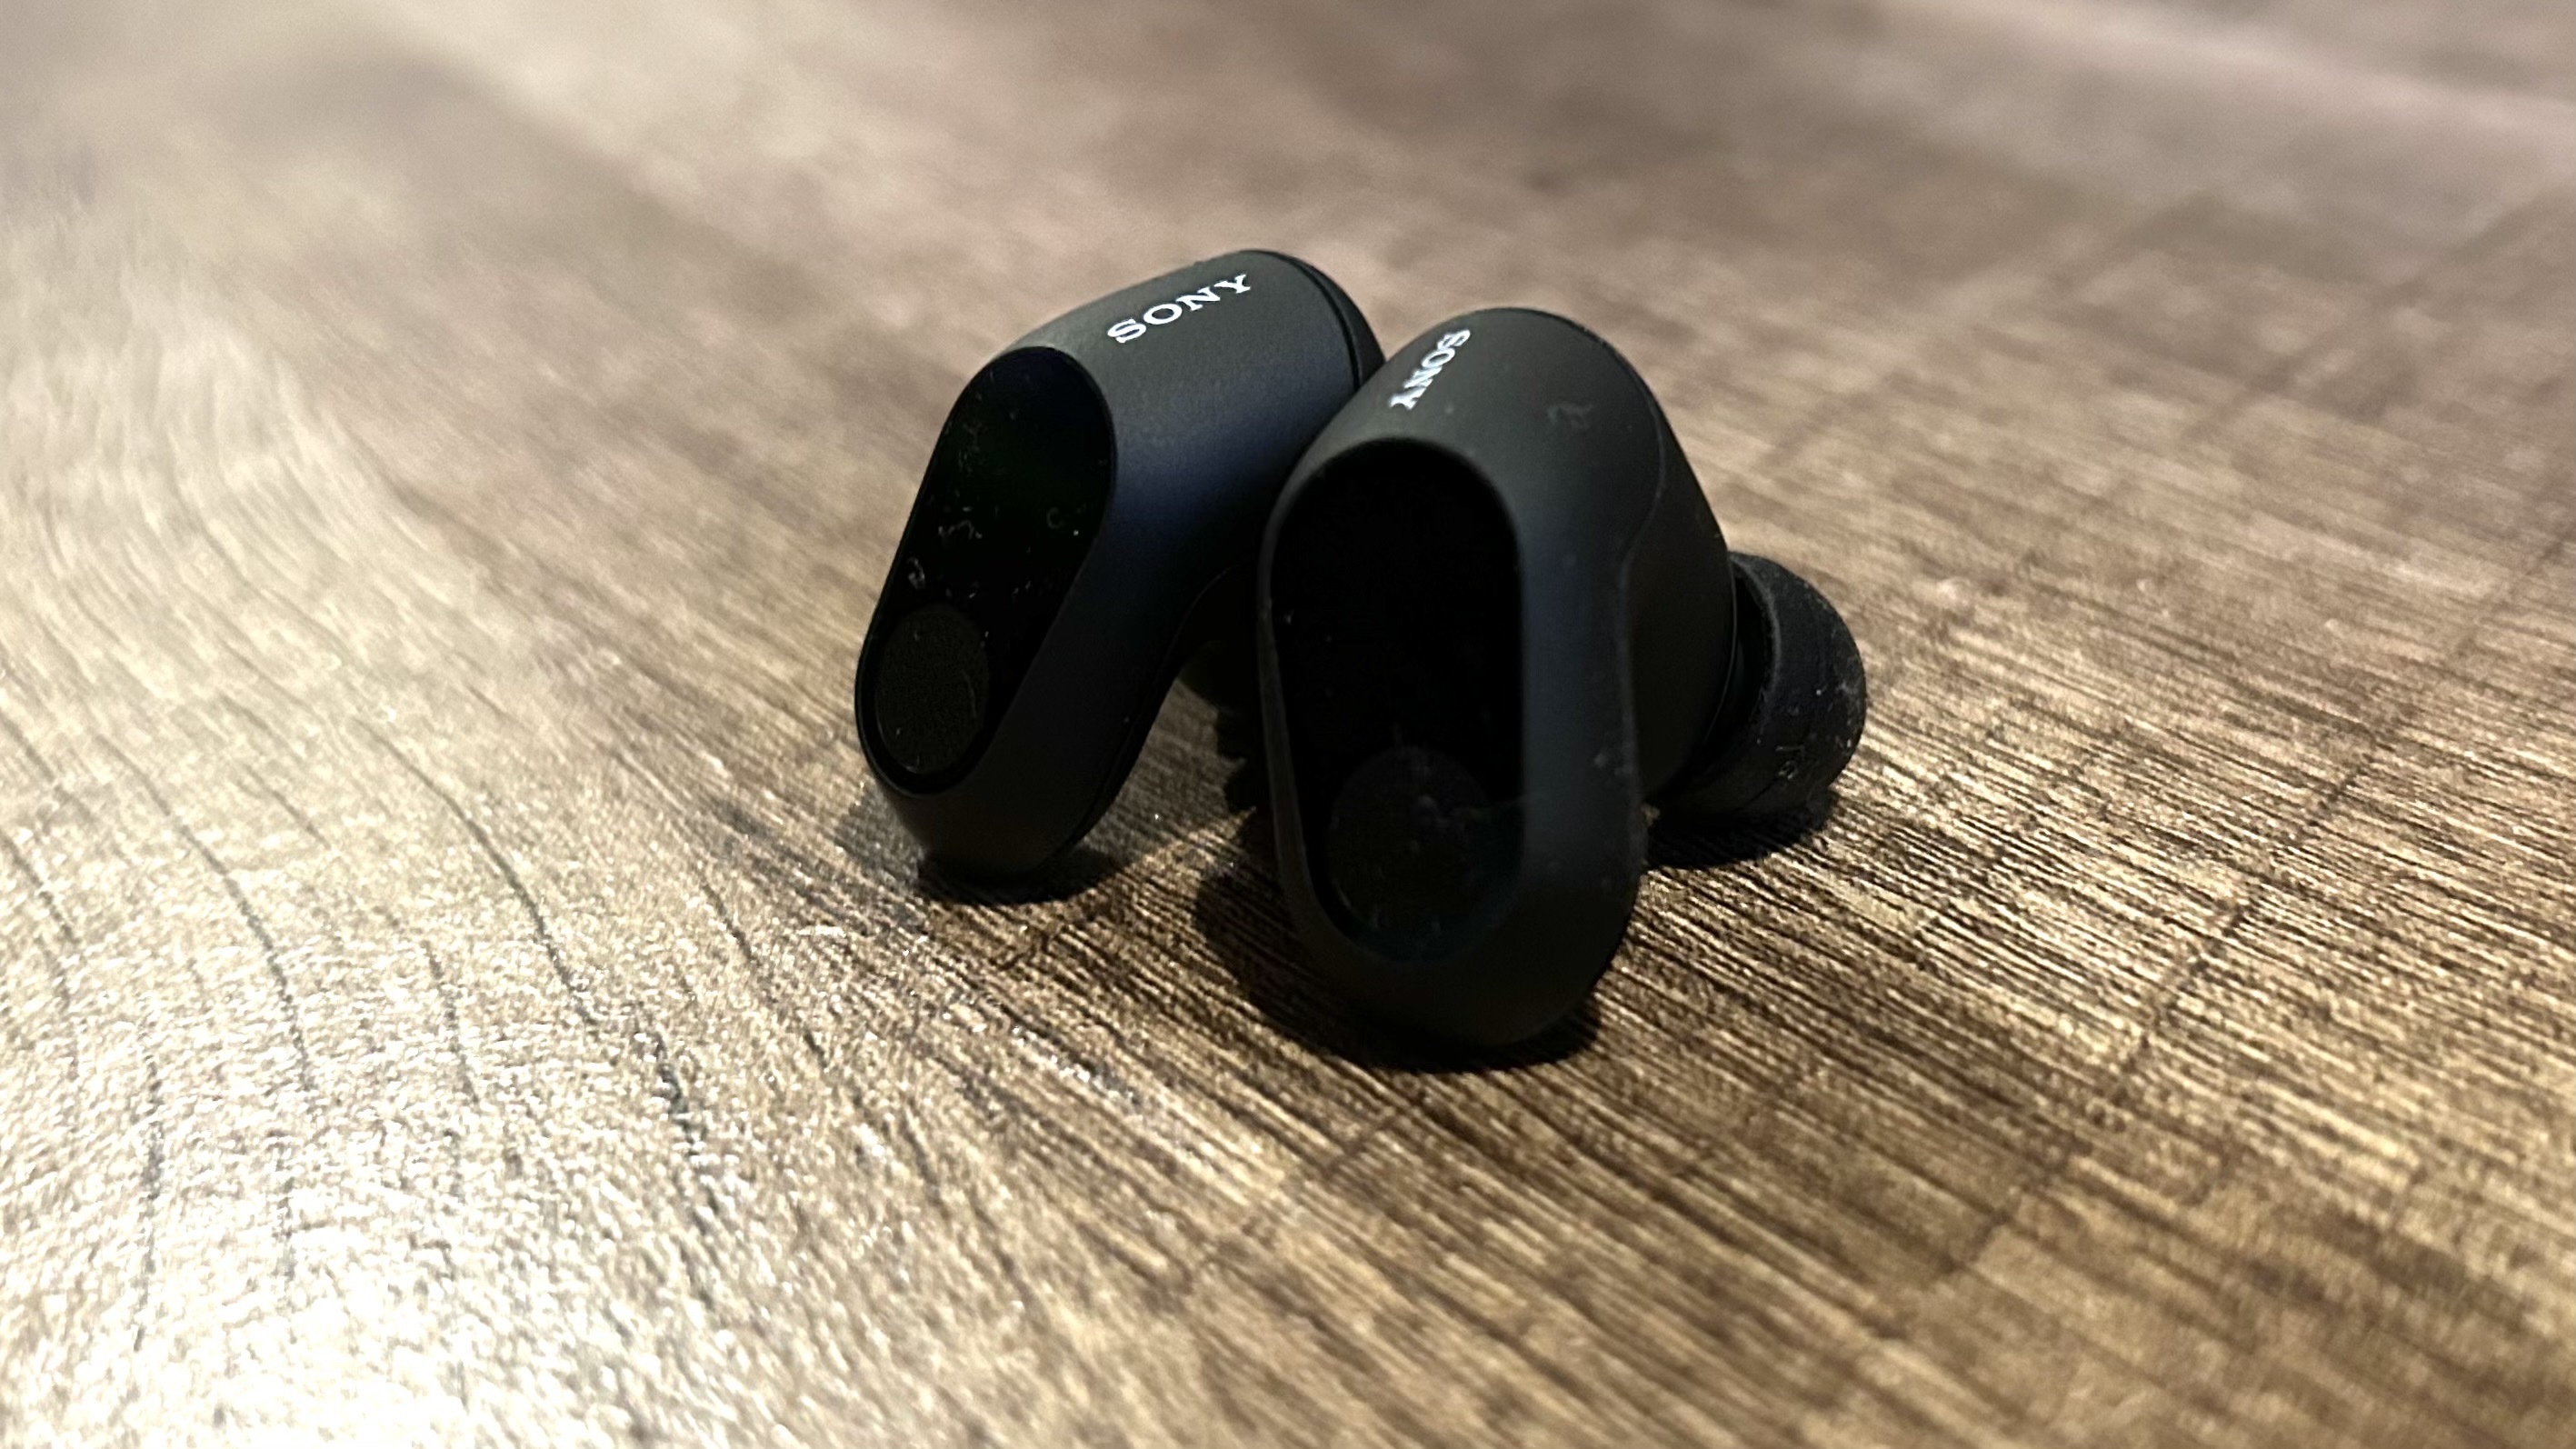 Sony Pulse Explore Earbuds Review: Good for Gaming, but They Also